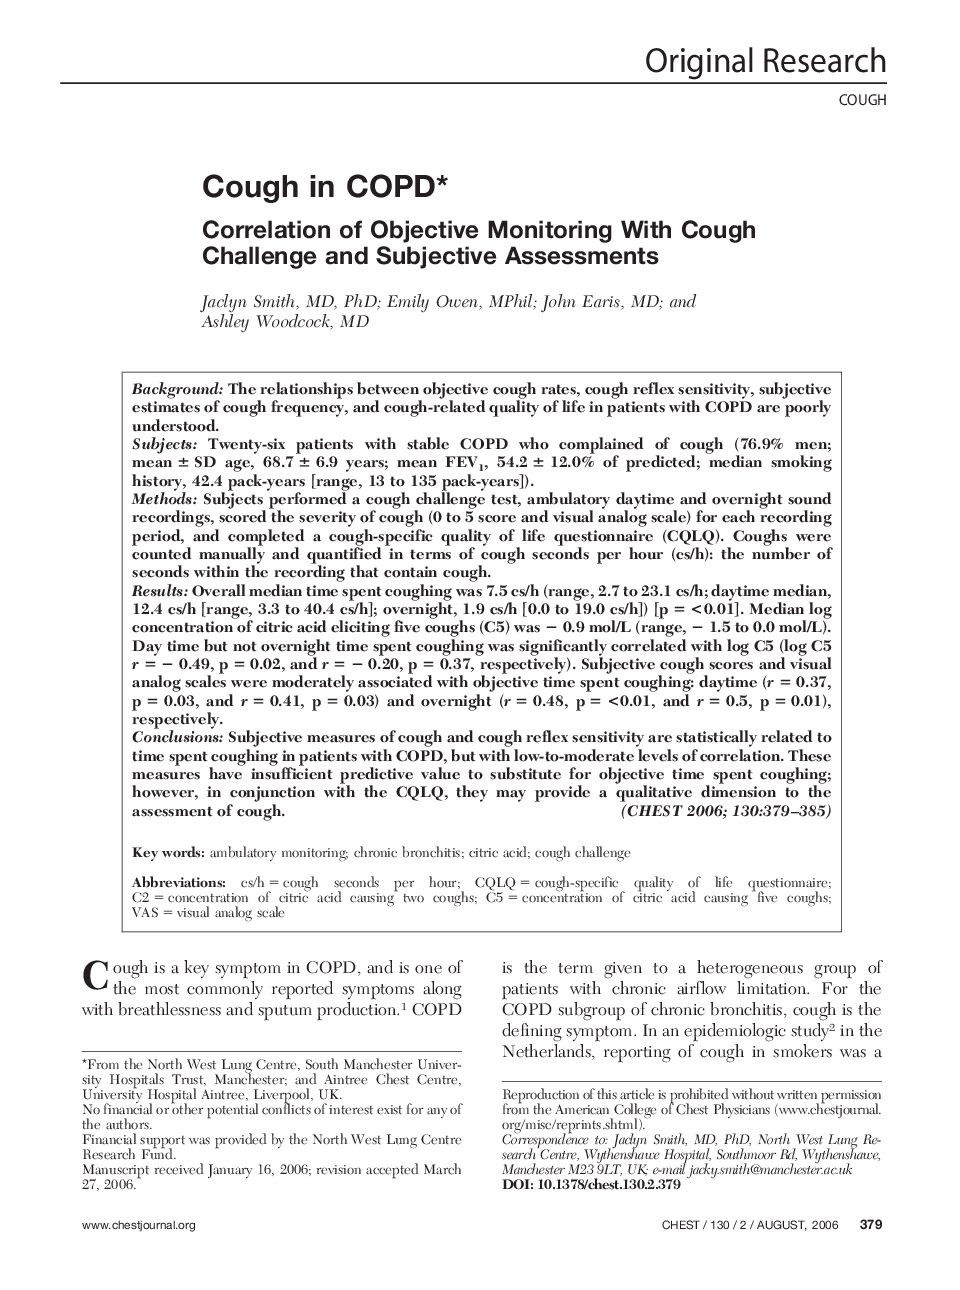 Cough in COPD : Correlation of Objective Monitoring With Cough Challenge and Subjective Assessments